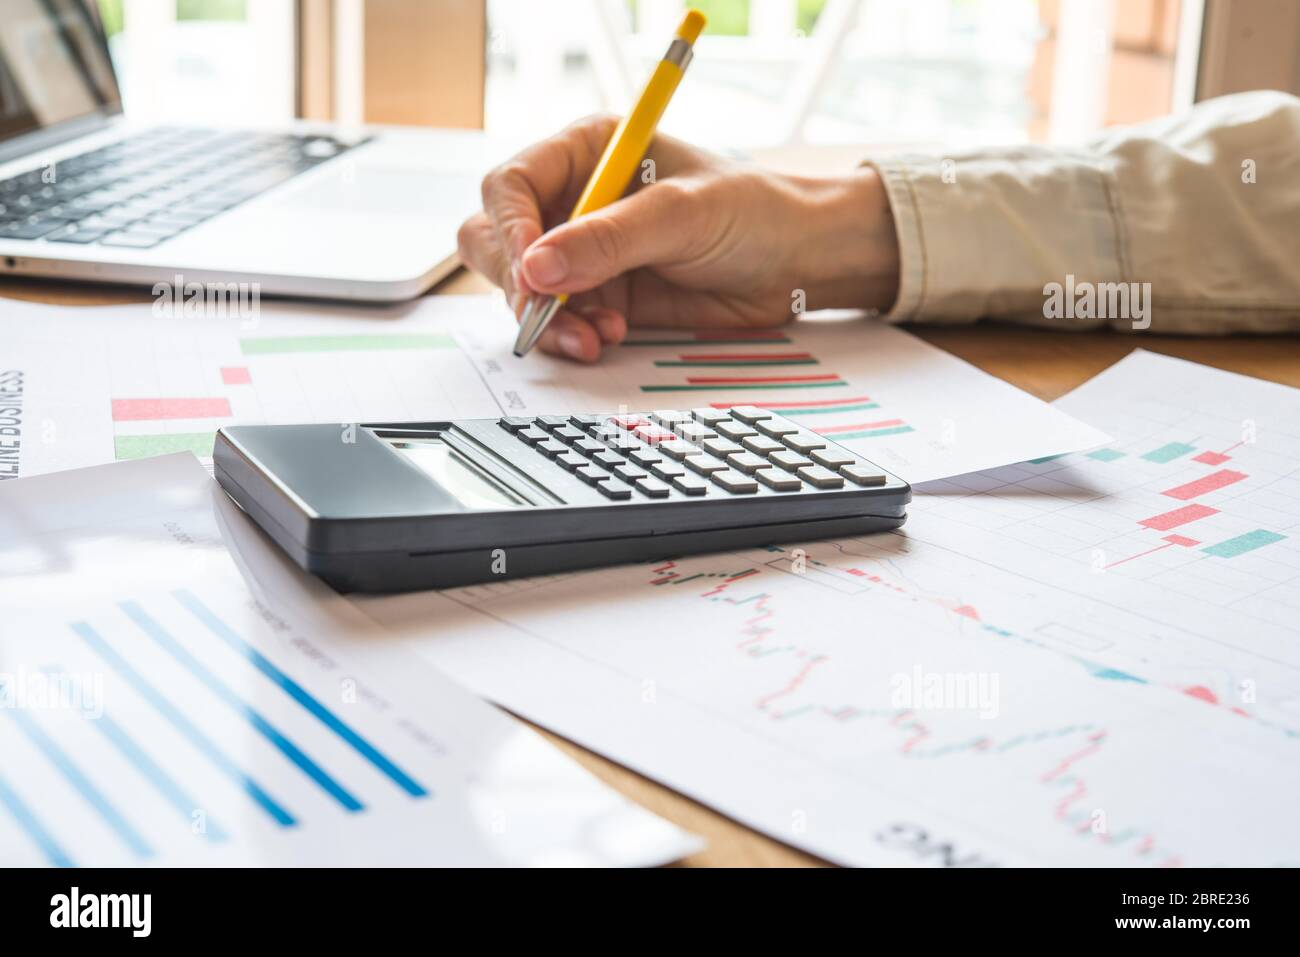 Young business busy working, entrepreneur analyzing financial information as graphics Stock Photo